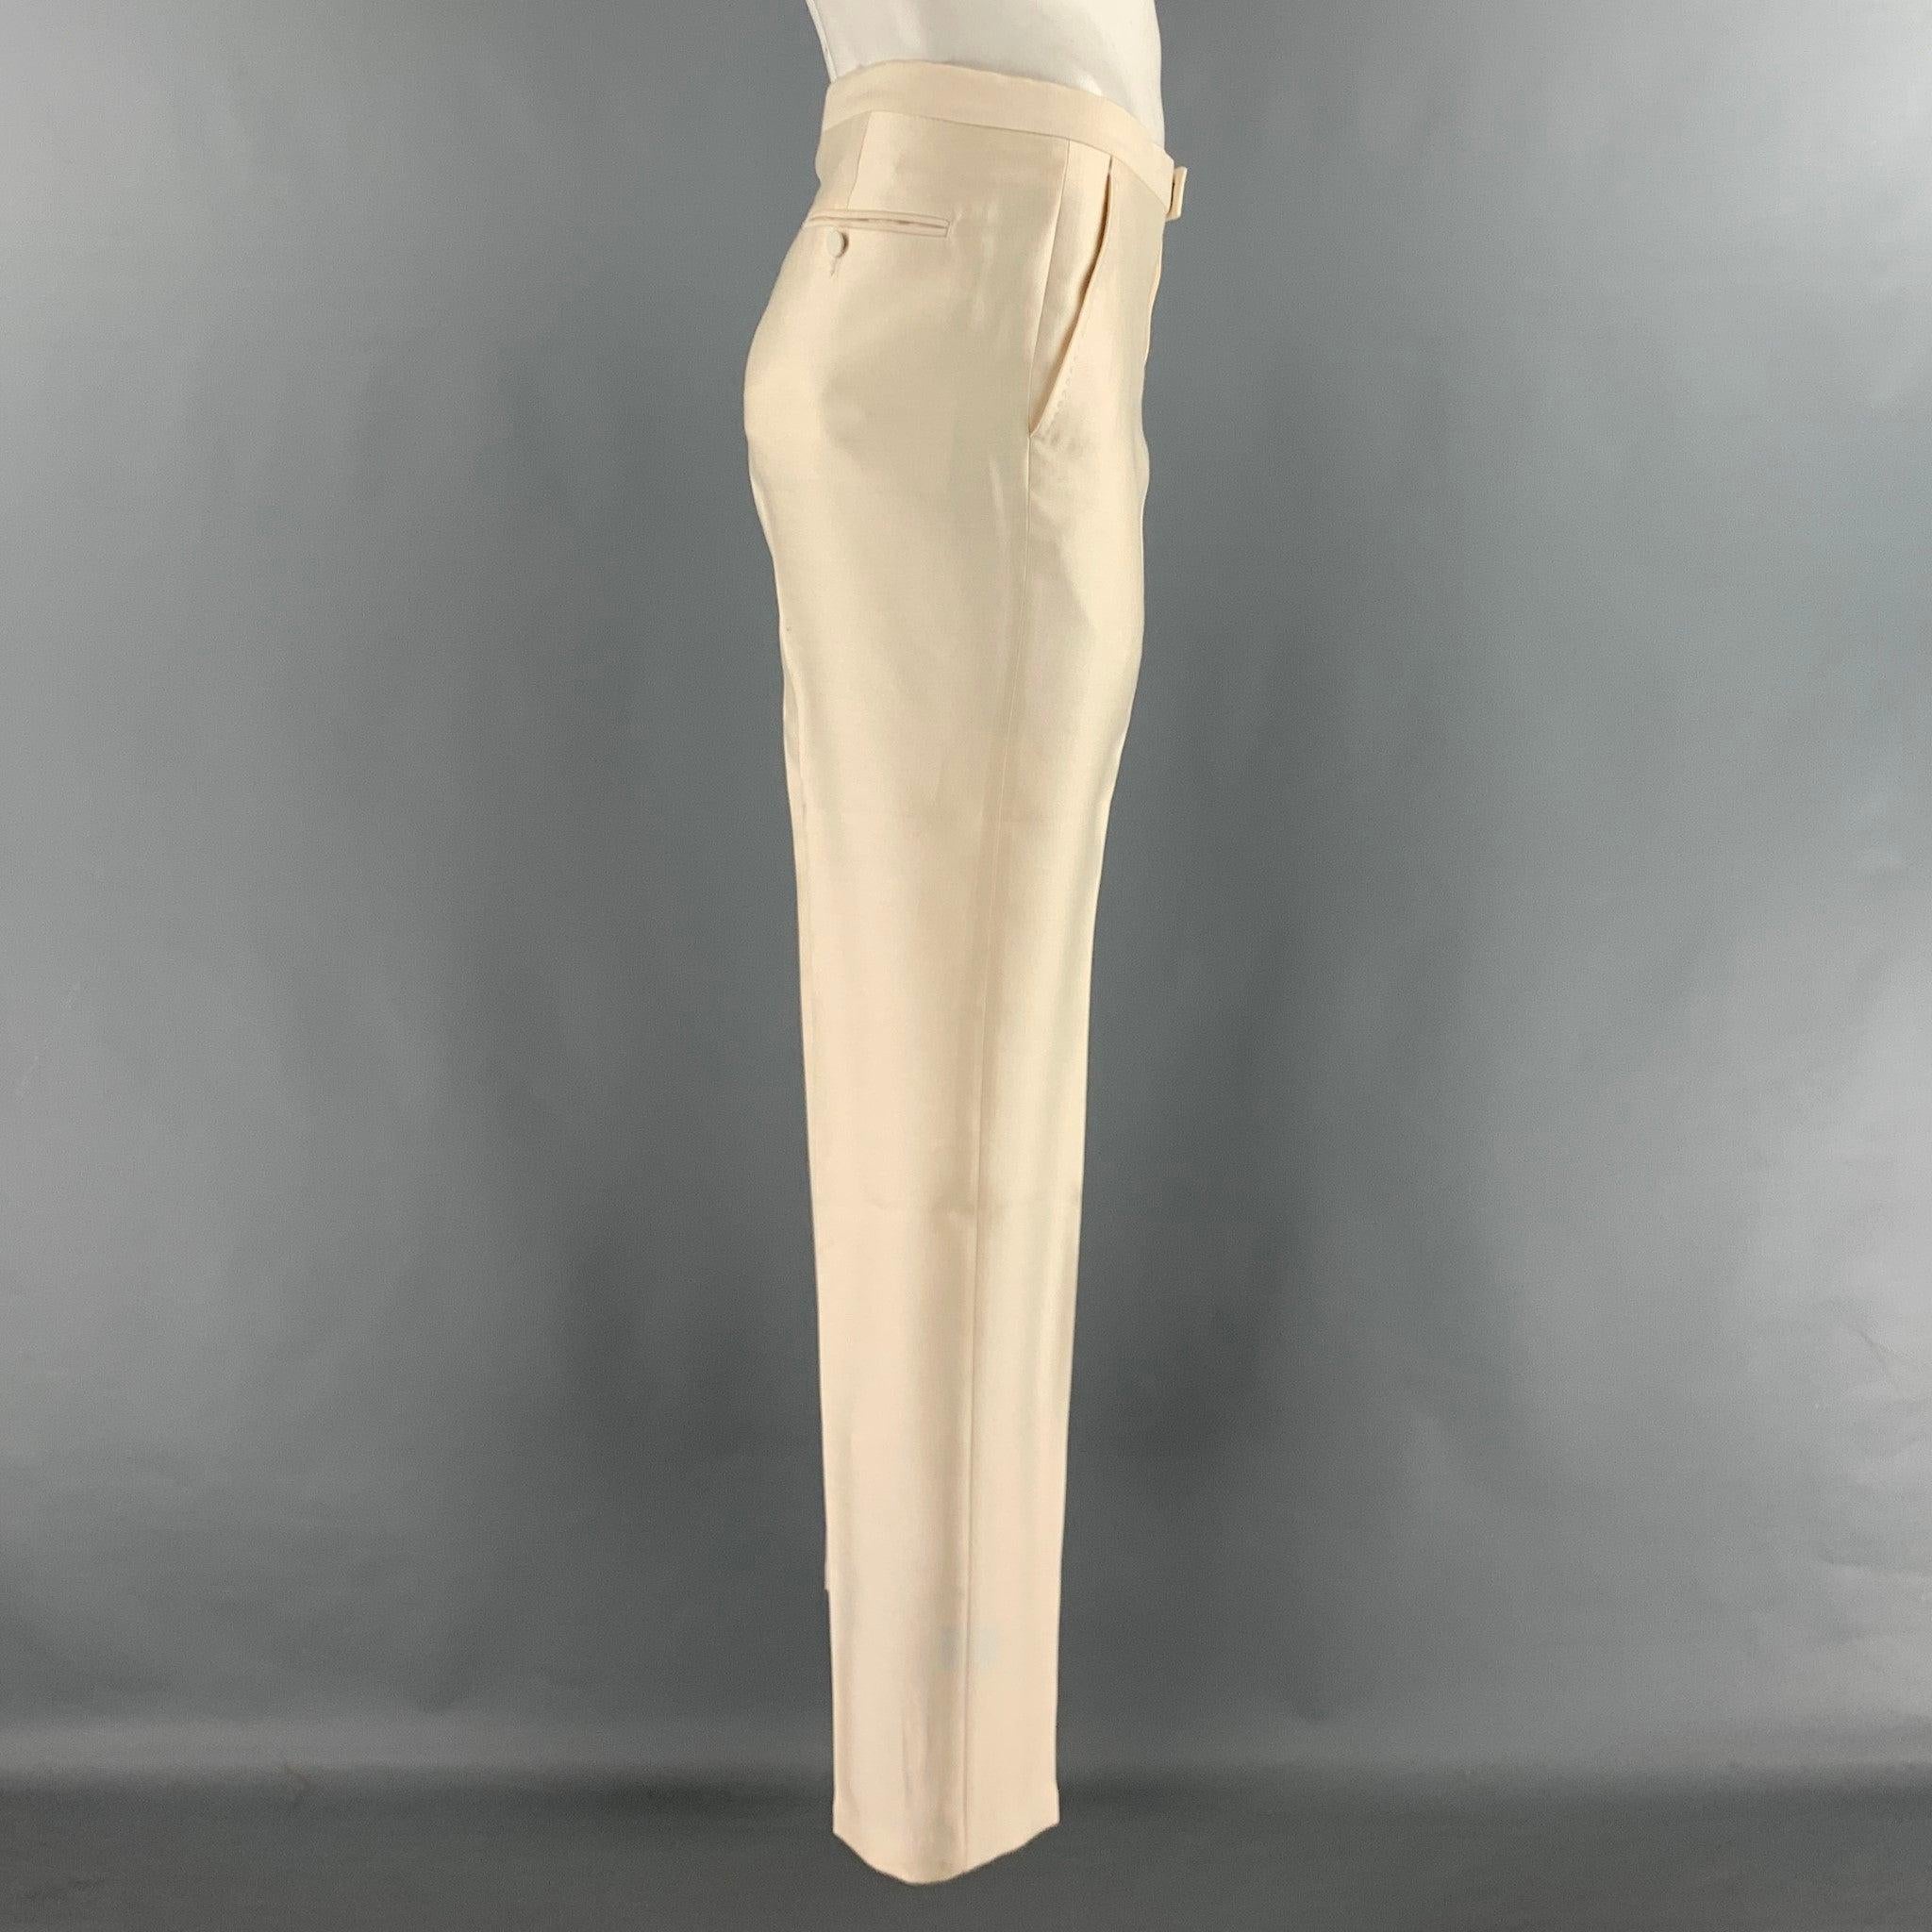 GUCCI dress pants in a beige wool and silk woven featuring flat front style, front tabs, and zip fly closure. Made in Italy.Excellent Pre-Owned Condition. 

Marked:   IT 50 R 

Measurements: 
  Waist: 34 inches Rise: 9 inches Inseam: 33.5 inches  
 